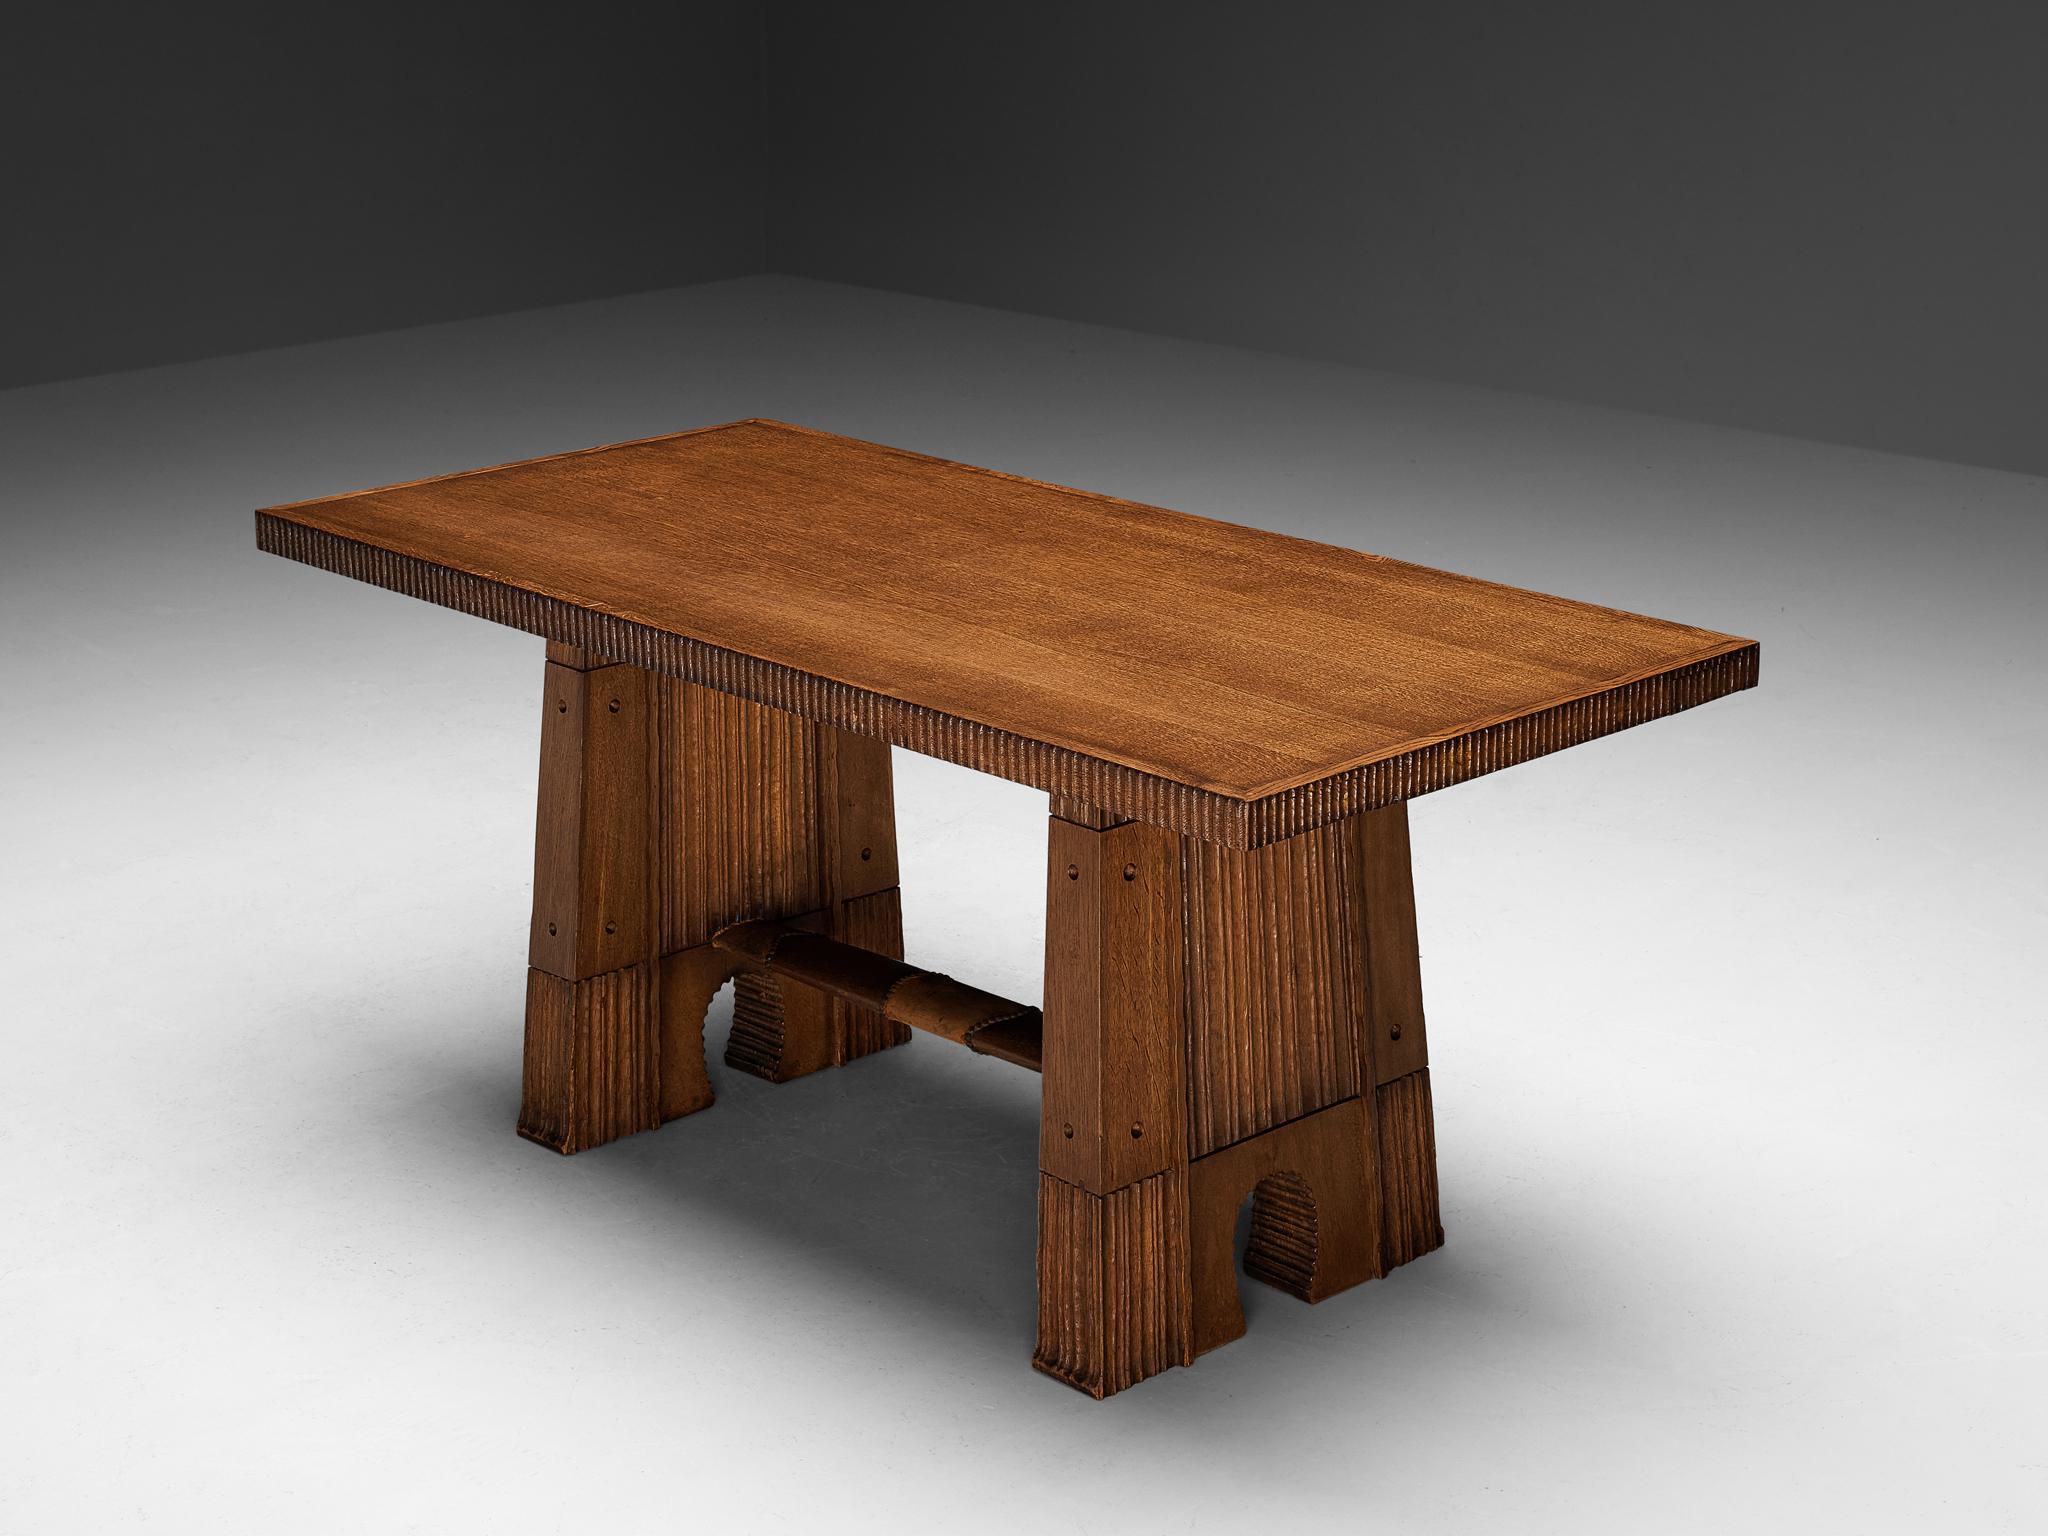 Vittorio Valabrega, dining table, oak, leather, iron, Italy, circa 1935 

Vittorio Valabrega once again proves his great eye for materialization and great craftsmanship this dining table is exemplary for. The table is architecturally built with